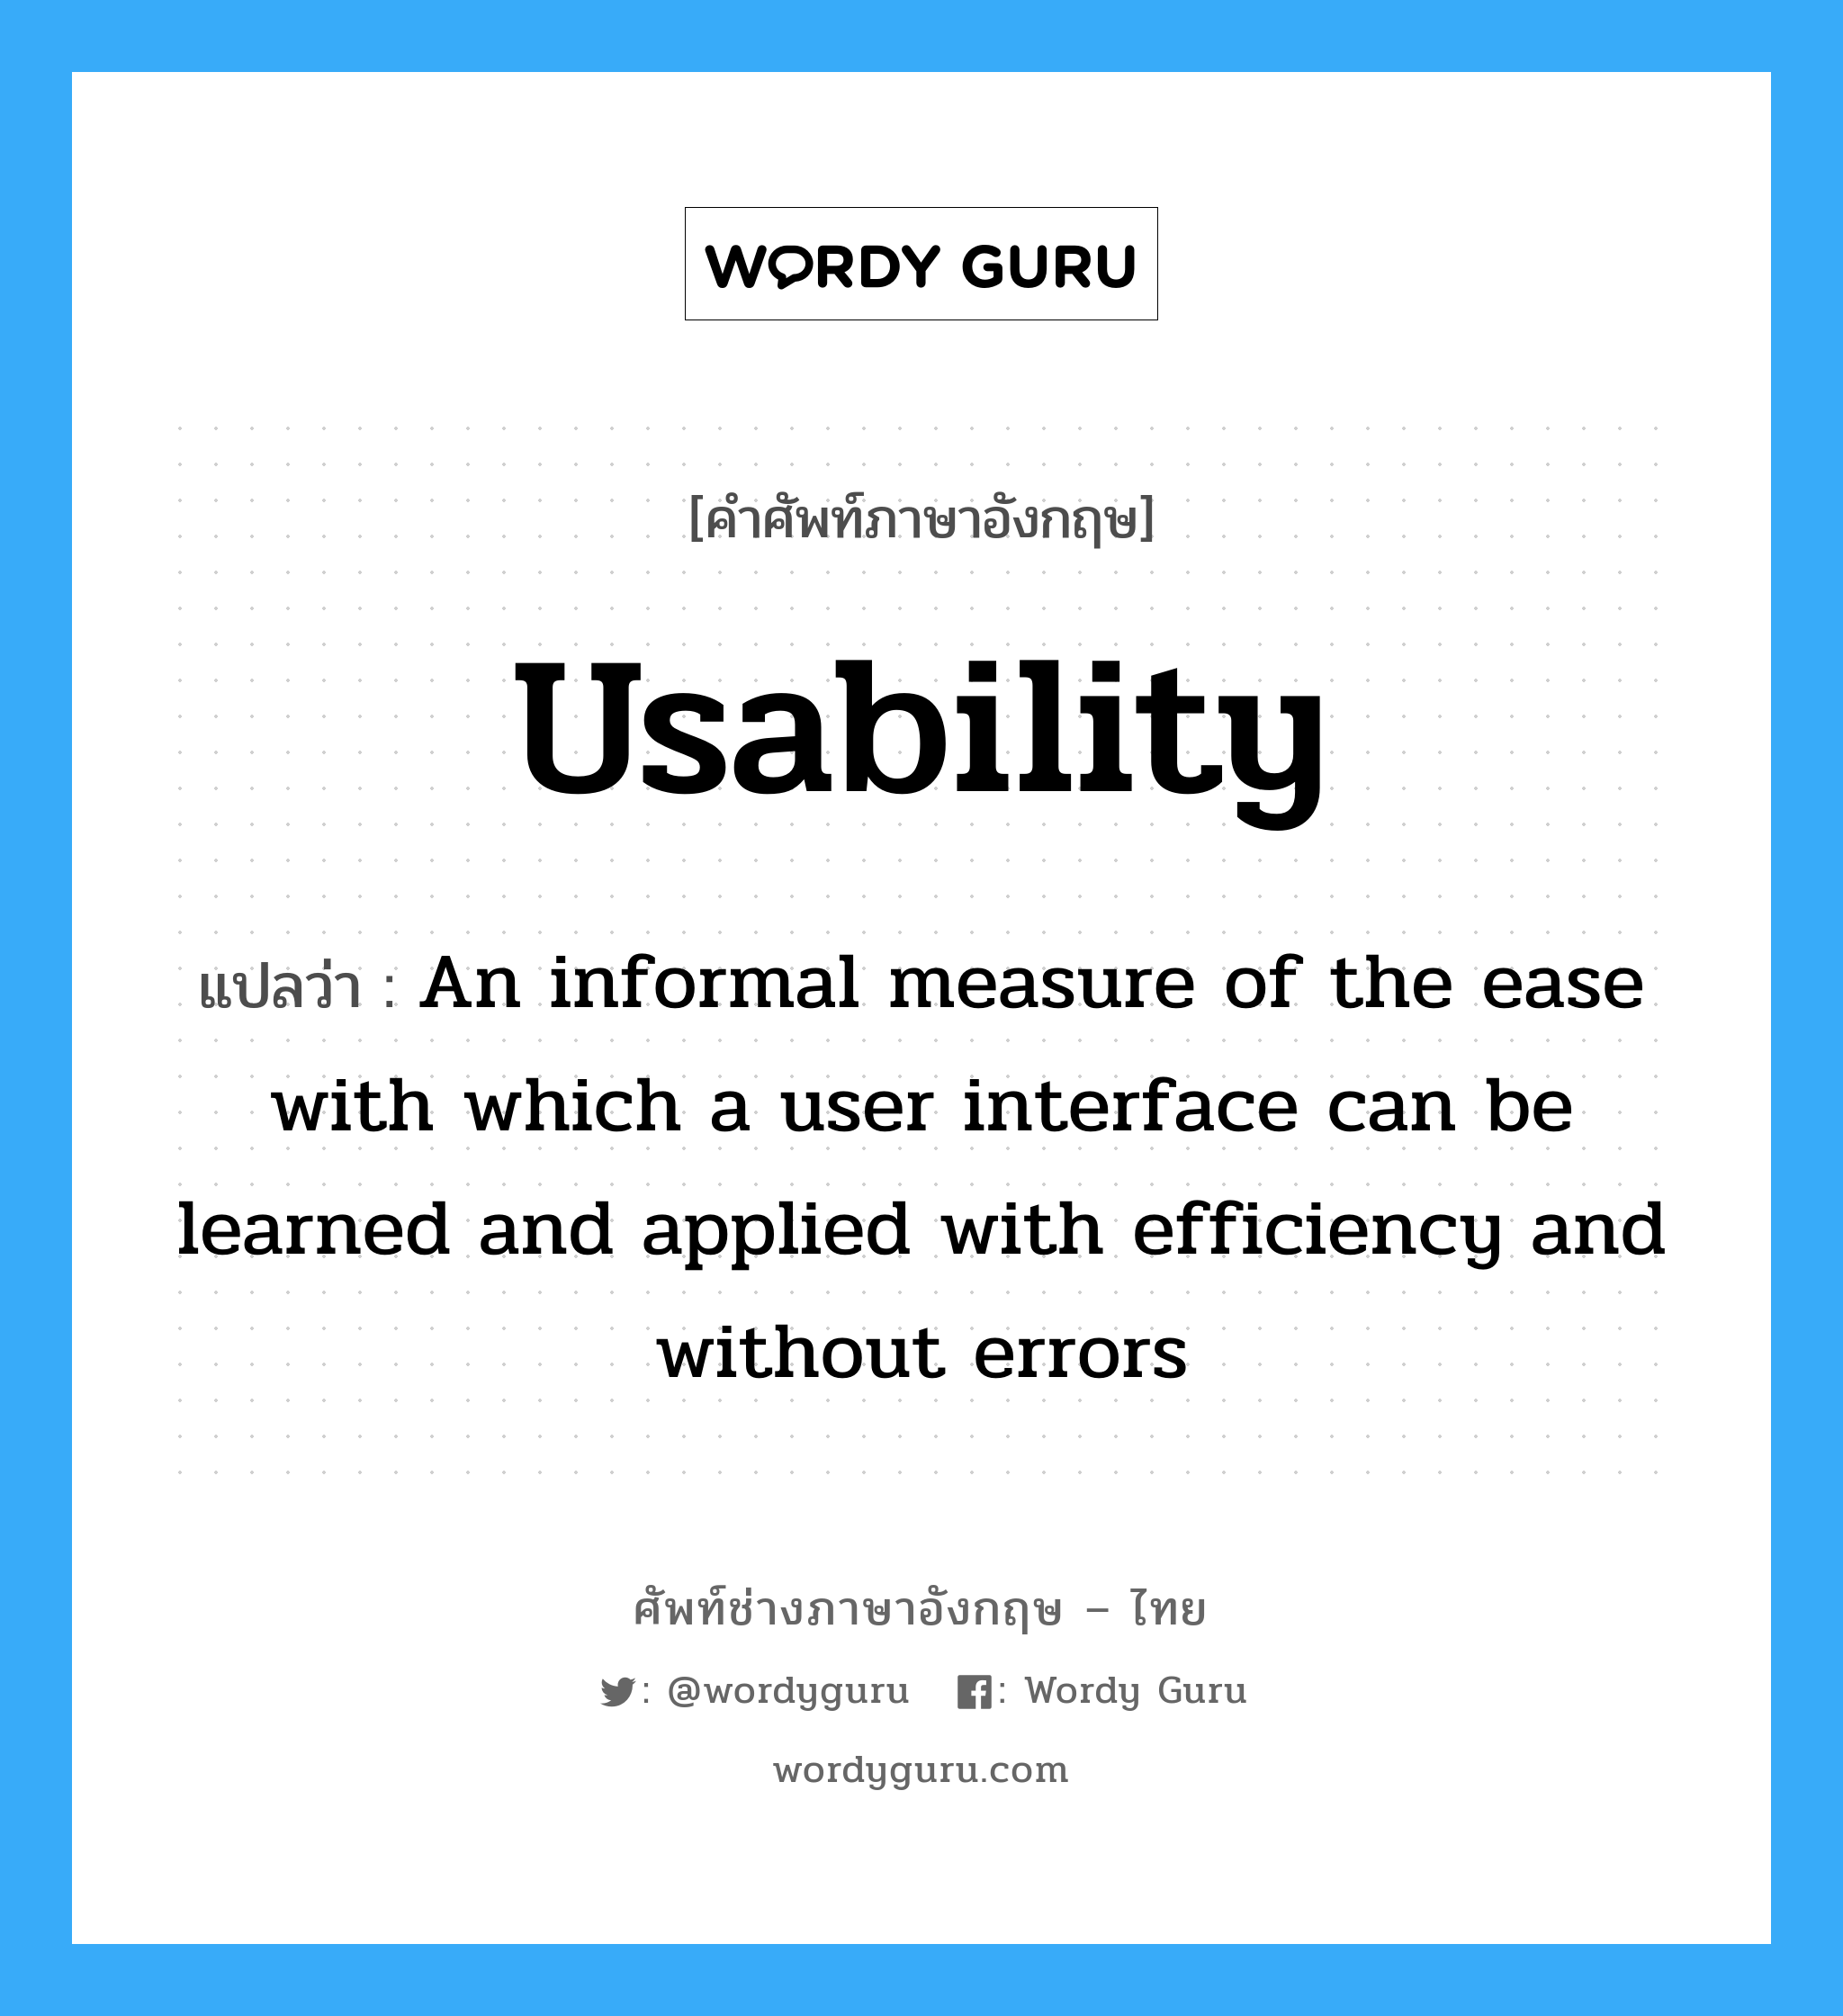 An informal measure of the ease with which a user interface can be learned and applied with efficiency and without errors ภาษาอังกฤษ?, คำศัพท์ช่างภาษาอังกฤษ - ไทย An informal measure of the ease with which a user interface can be learned and applied with efficiency and without errors คำศัพท์ภาษาอังกฤษ An informal measure of the ease with which a user interface can be learned and applied with efficiency and without errors แปลว่า Usability